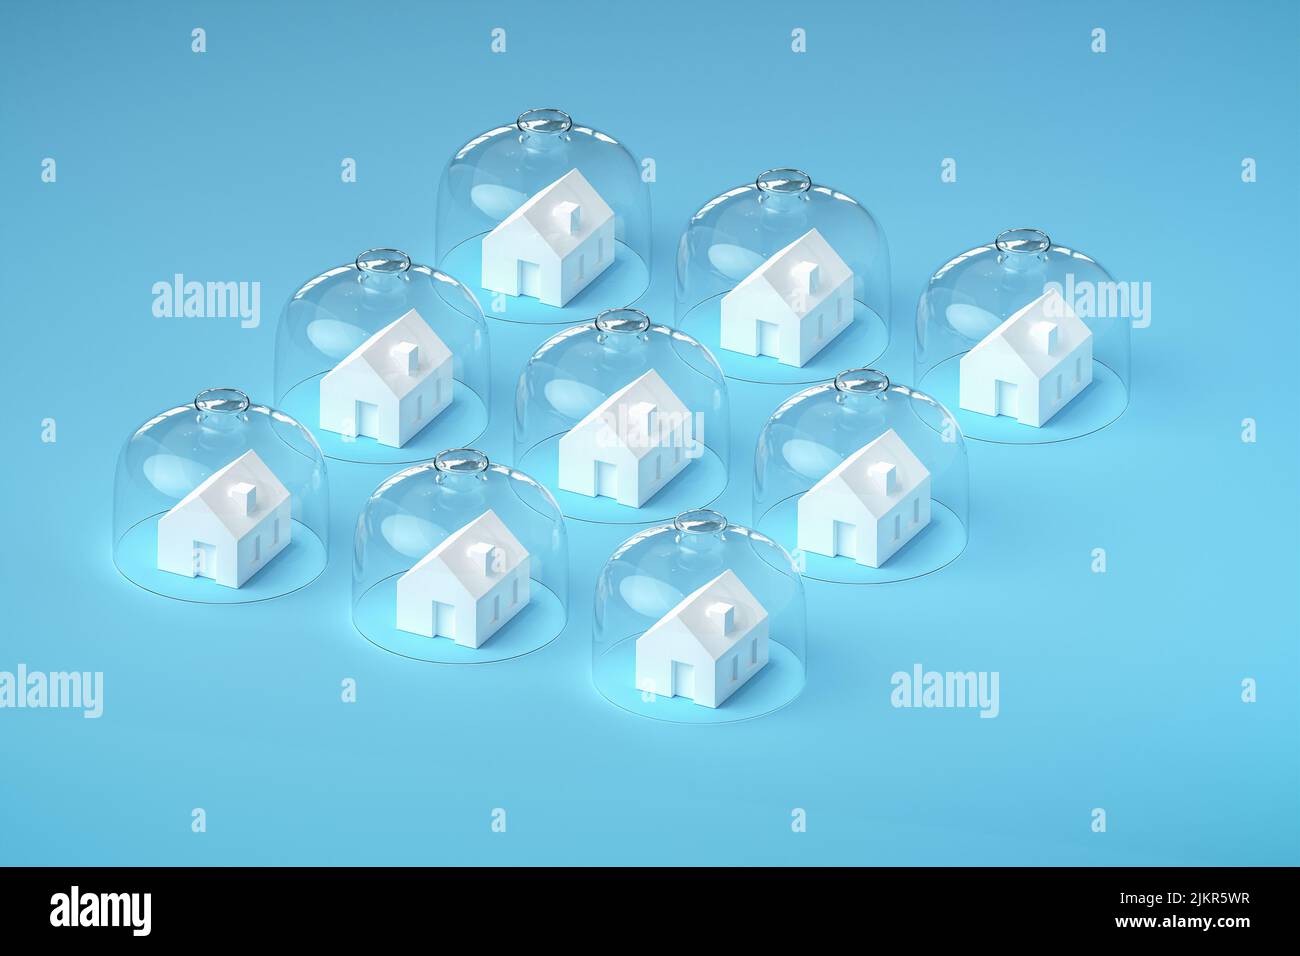 Protecting your property concept - insurance, surveillance. Several model houses with glass domes. Isometric image Stock Photo